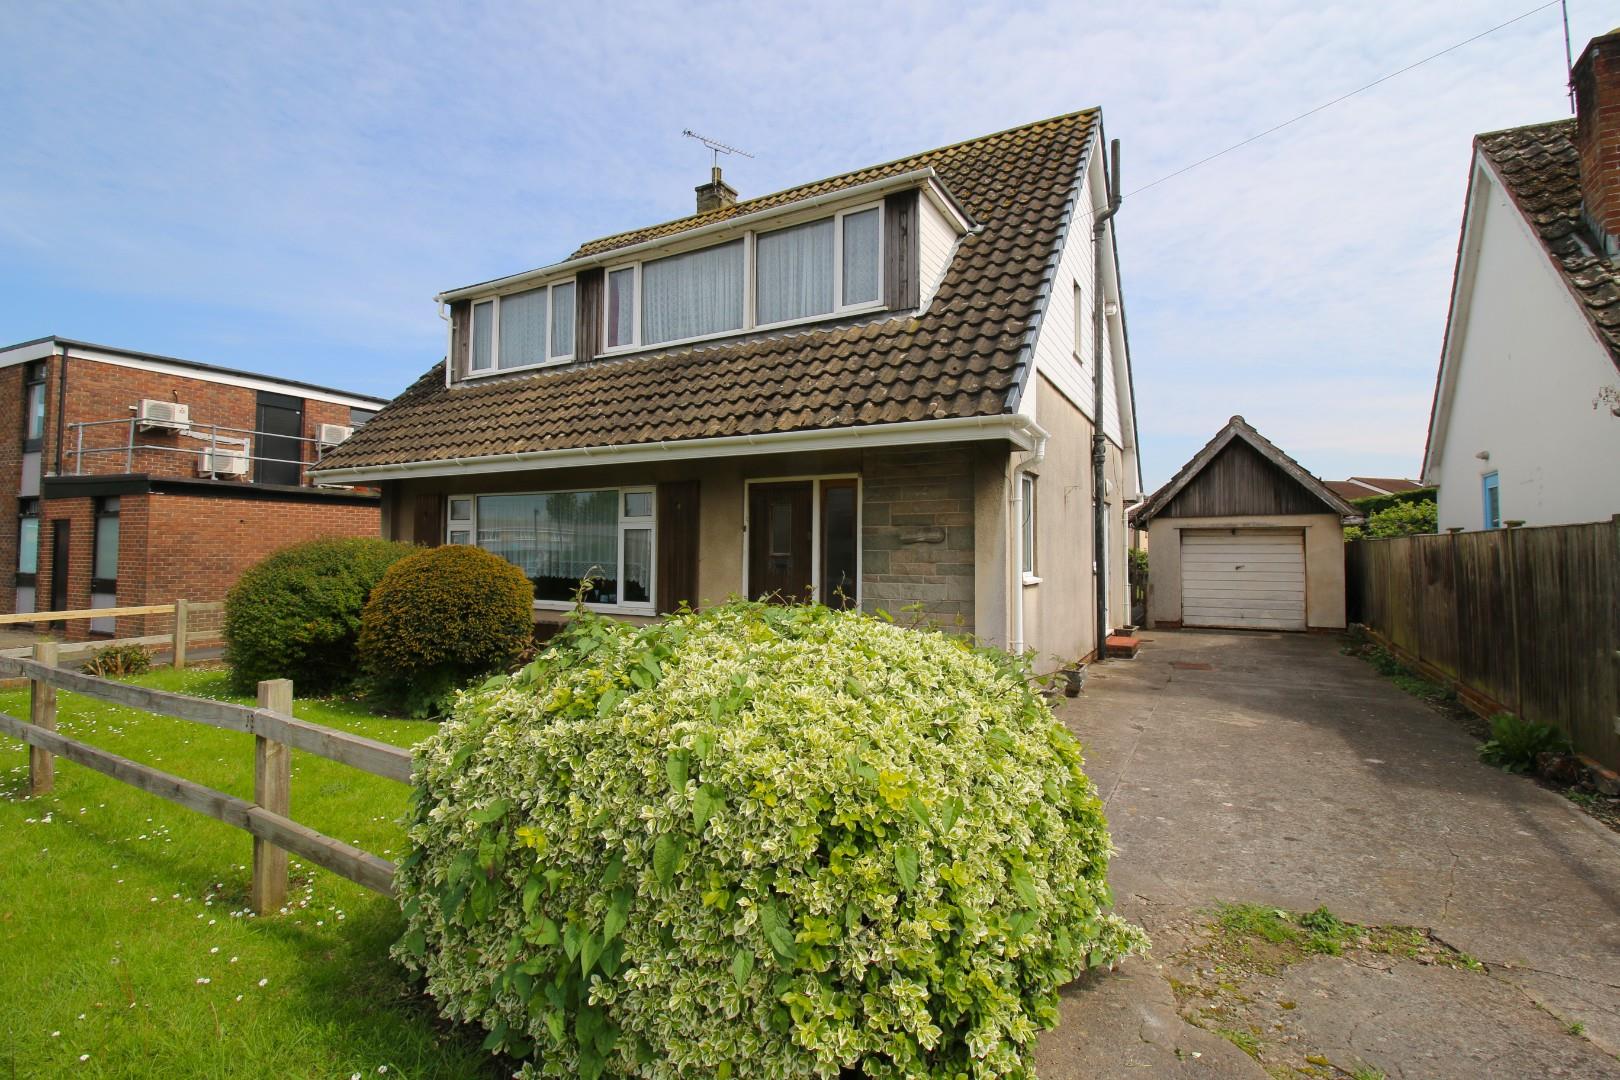 Three bedroom detached family home, situated in a prime location within the village of Yatton